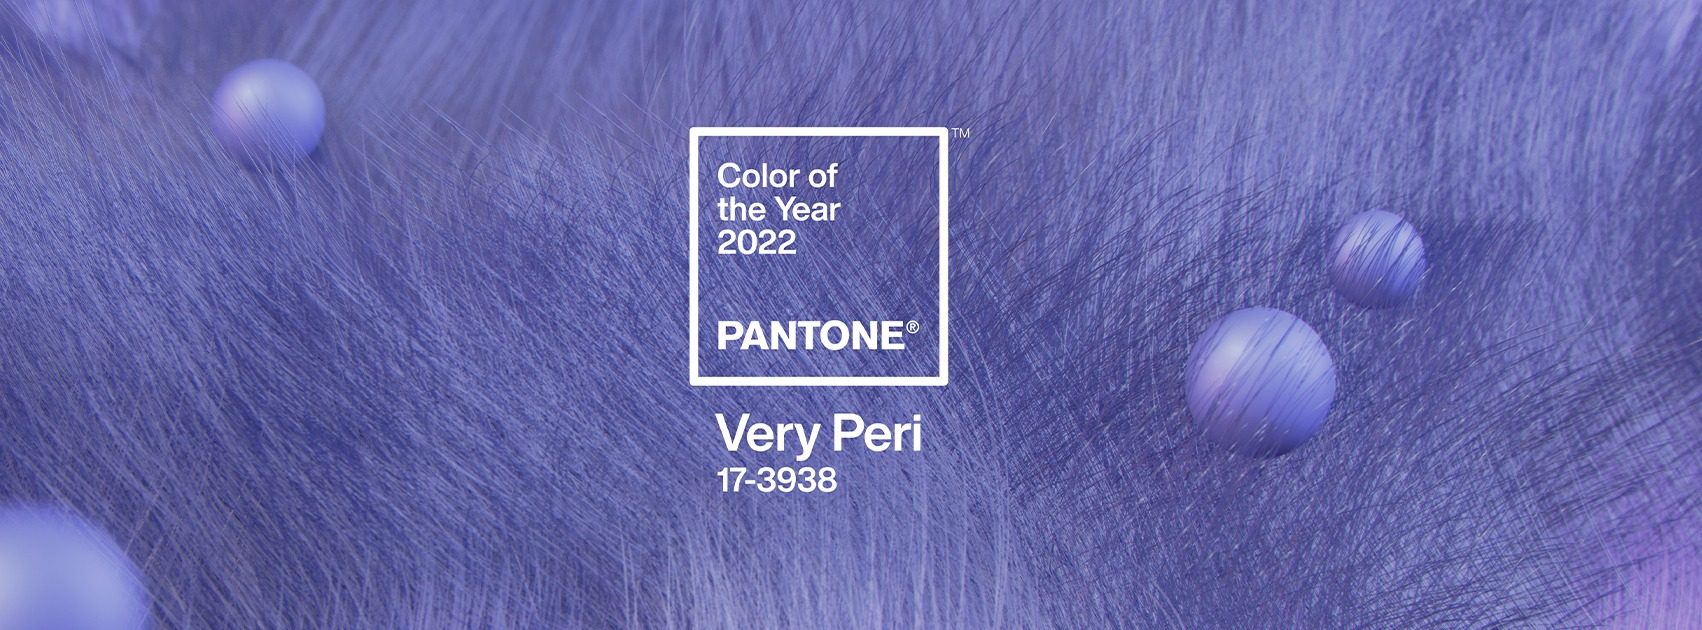 Pantone introduces Very Peri as its Color of the Year for 2022